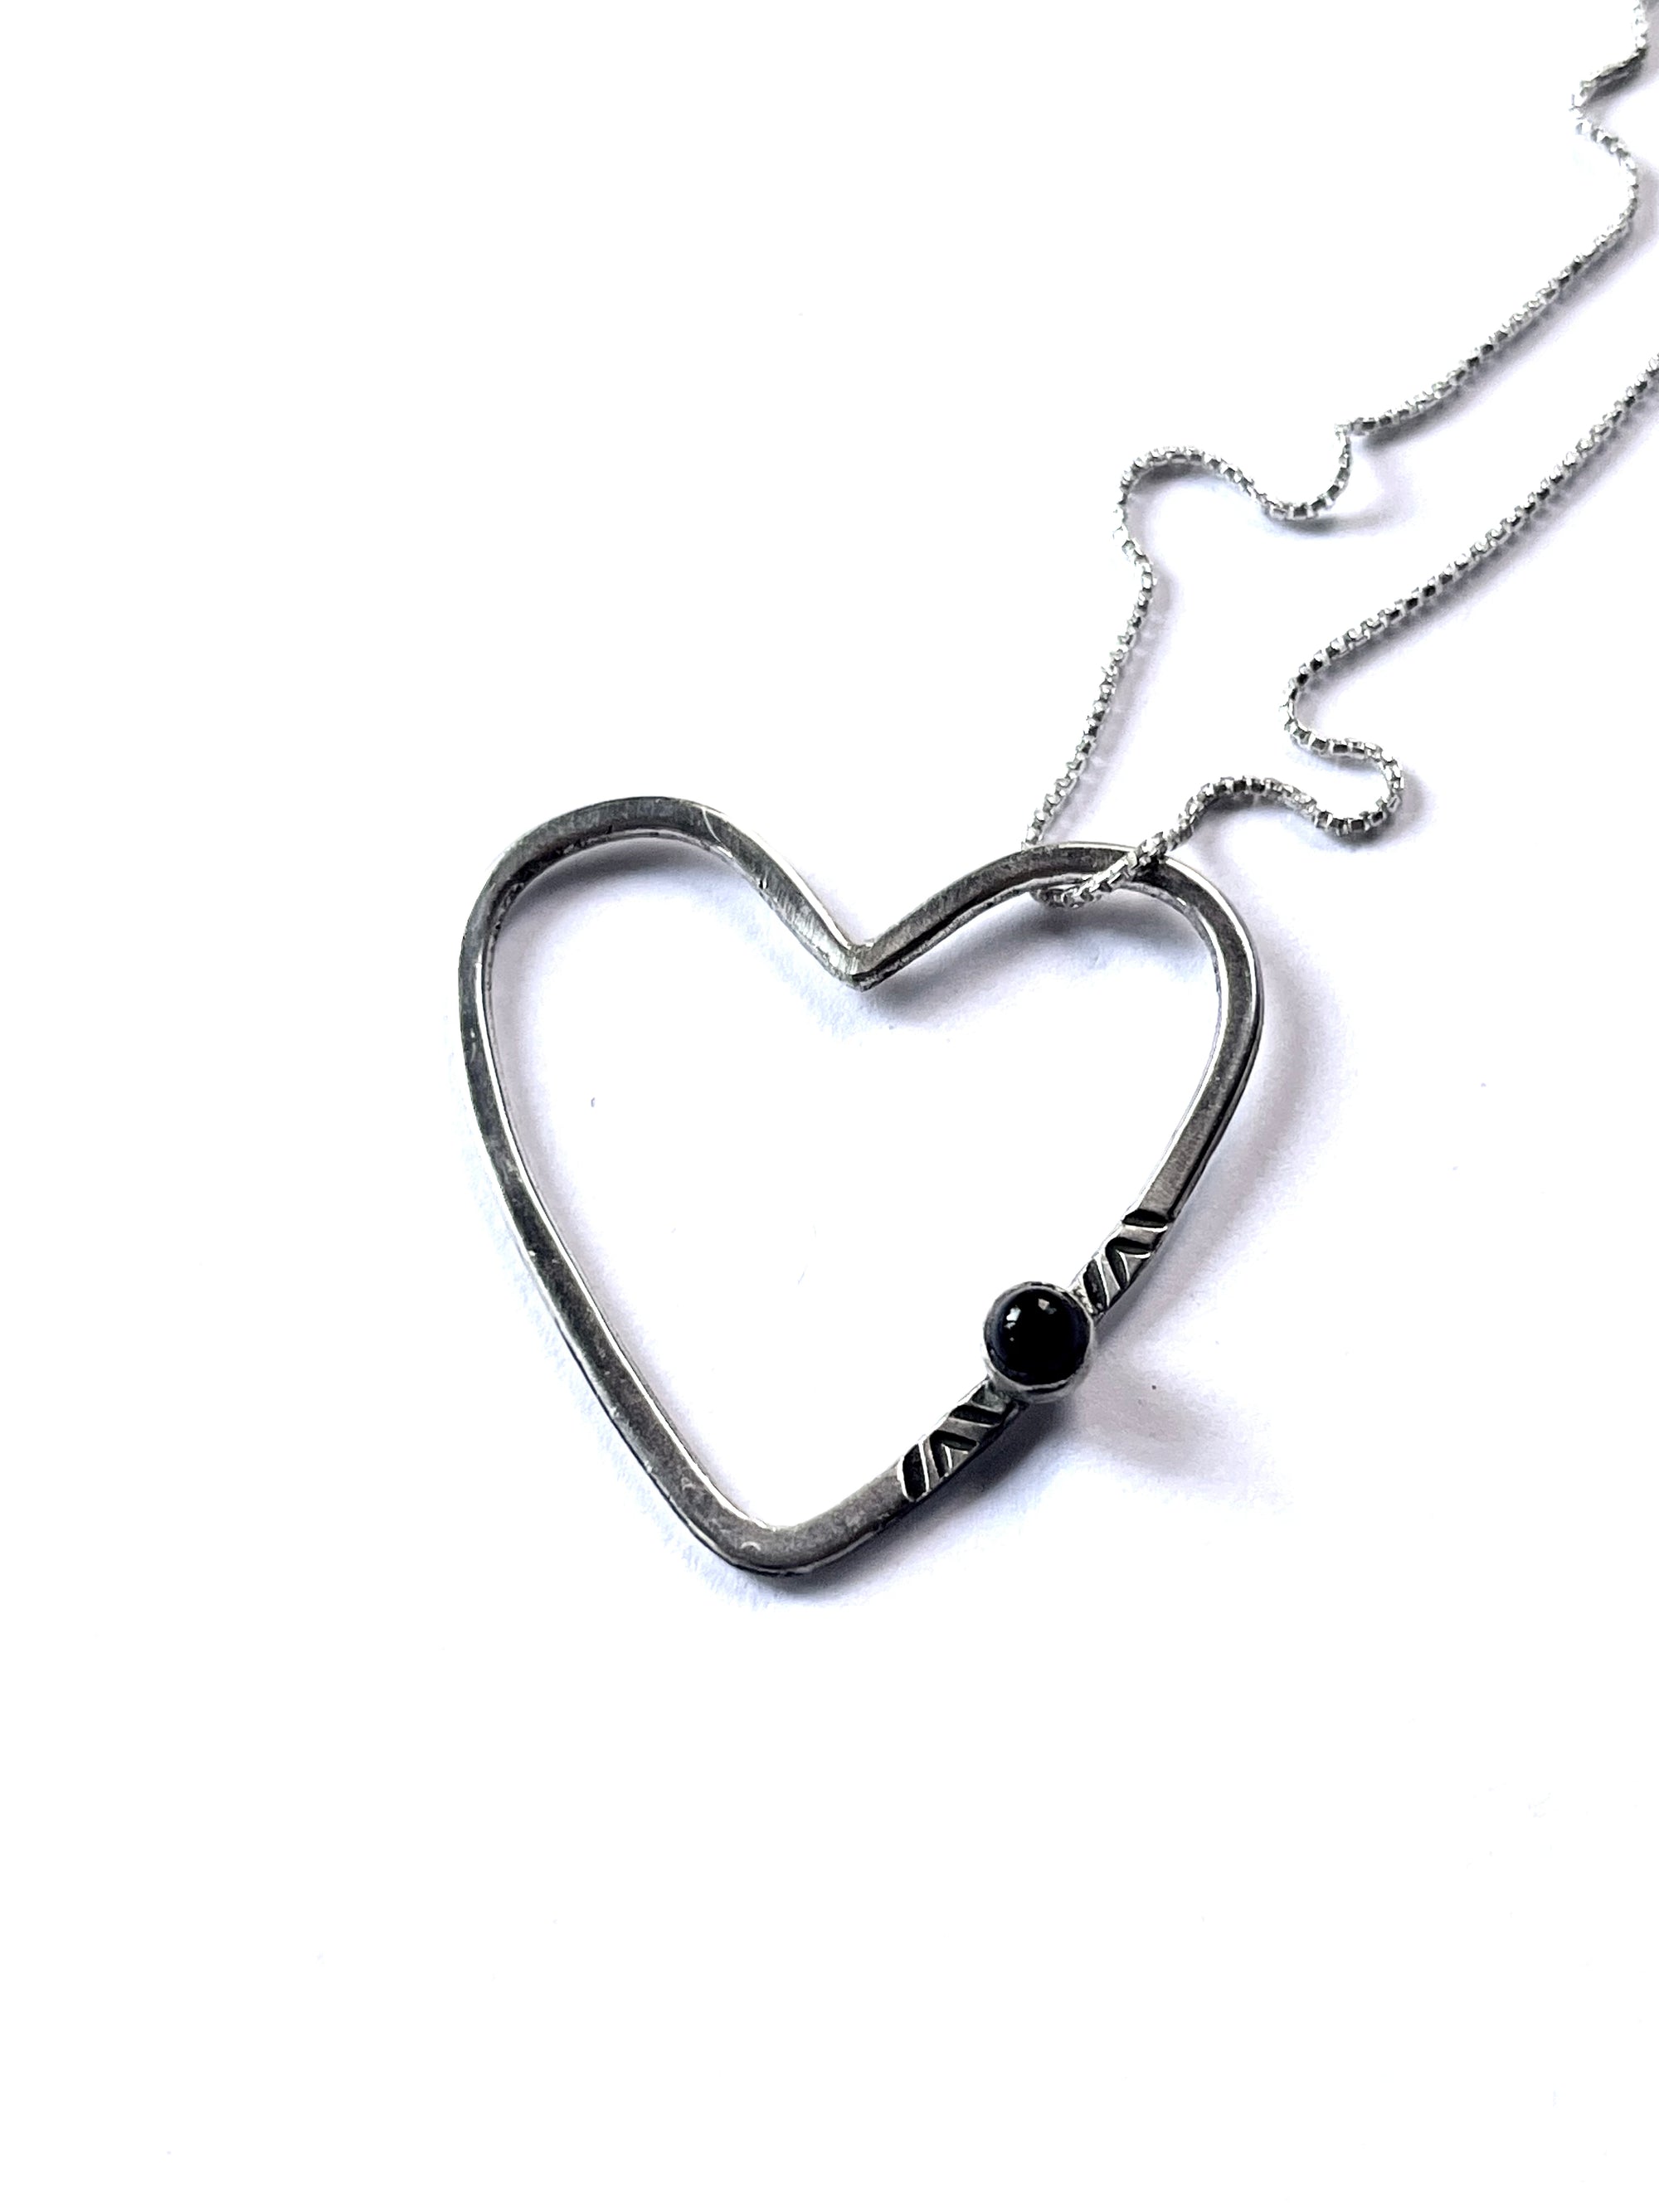 Black Onyx Chevron Stamped Heart Necklace